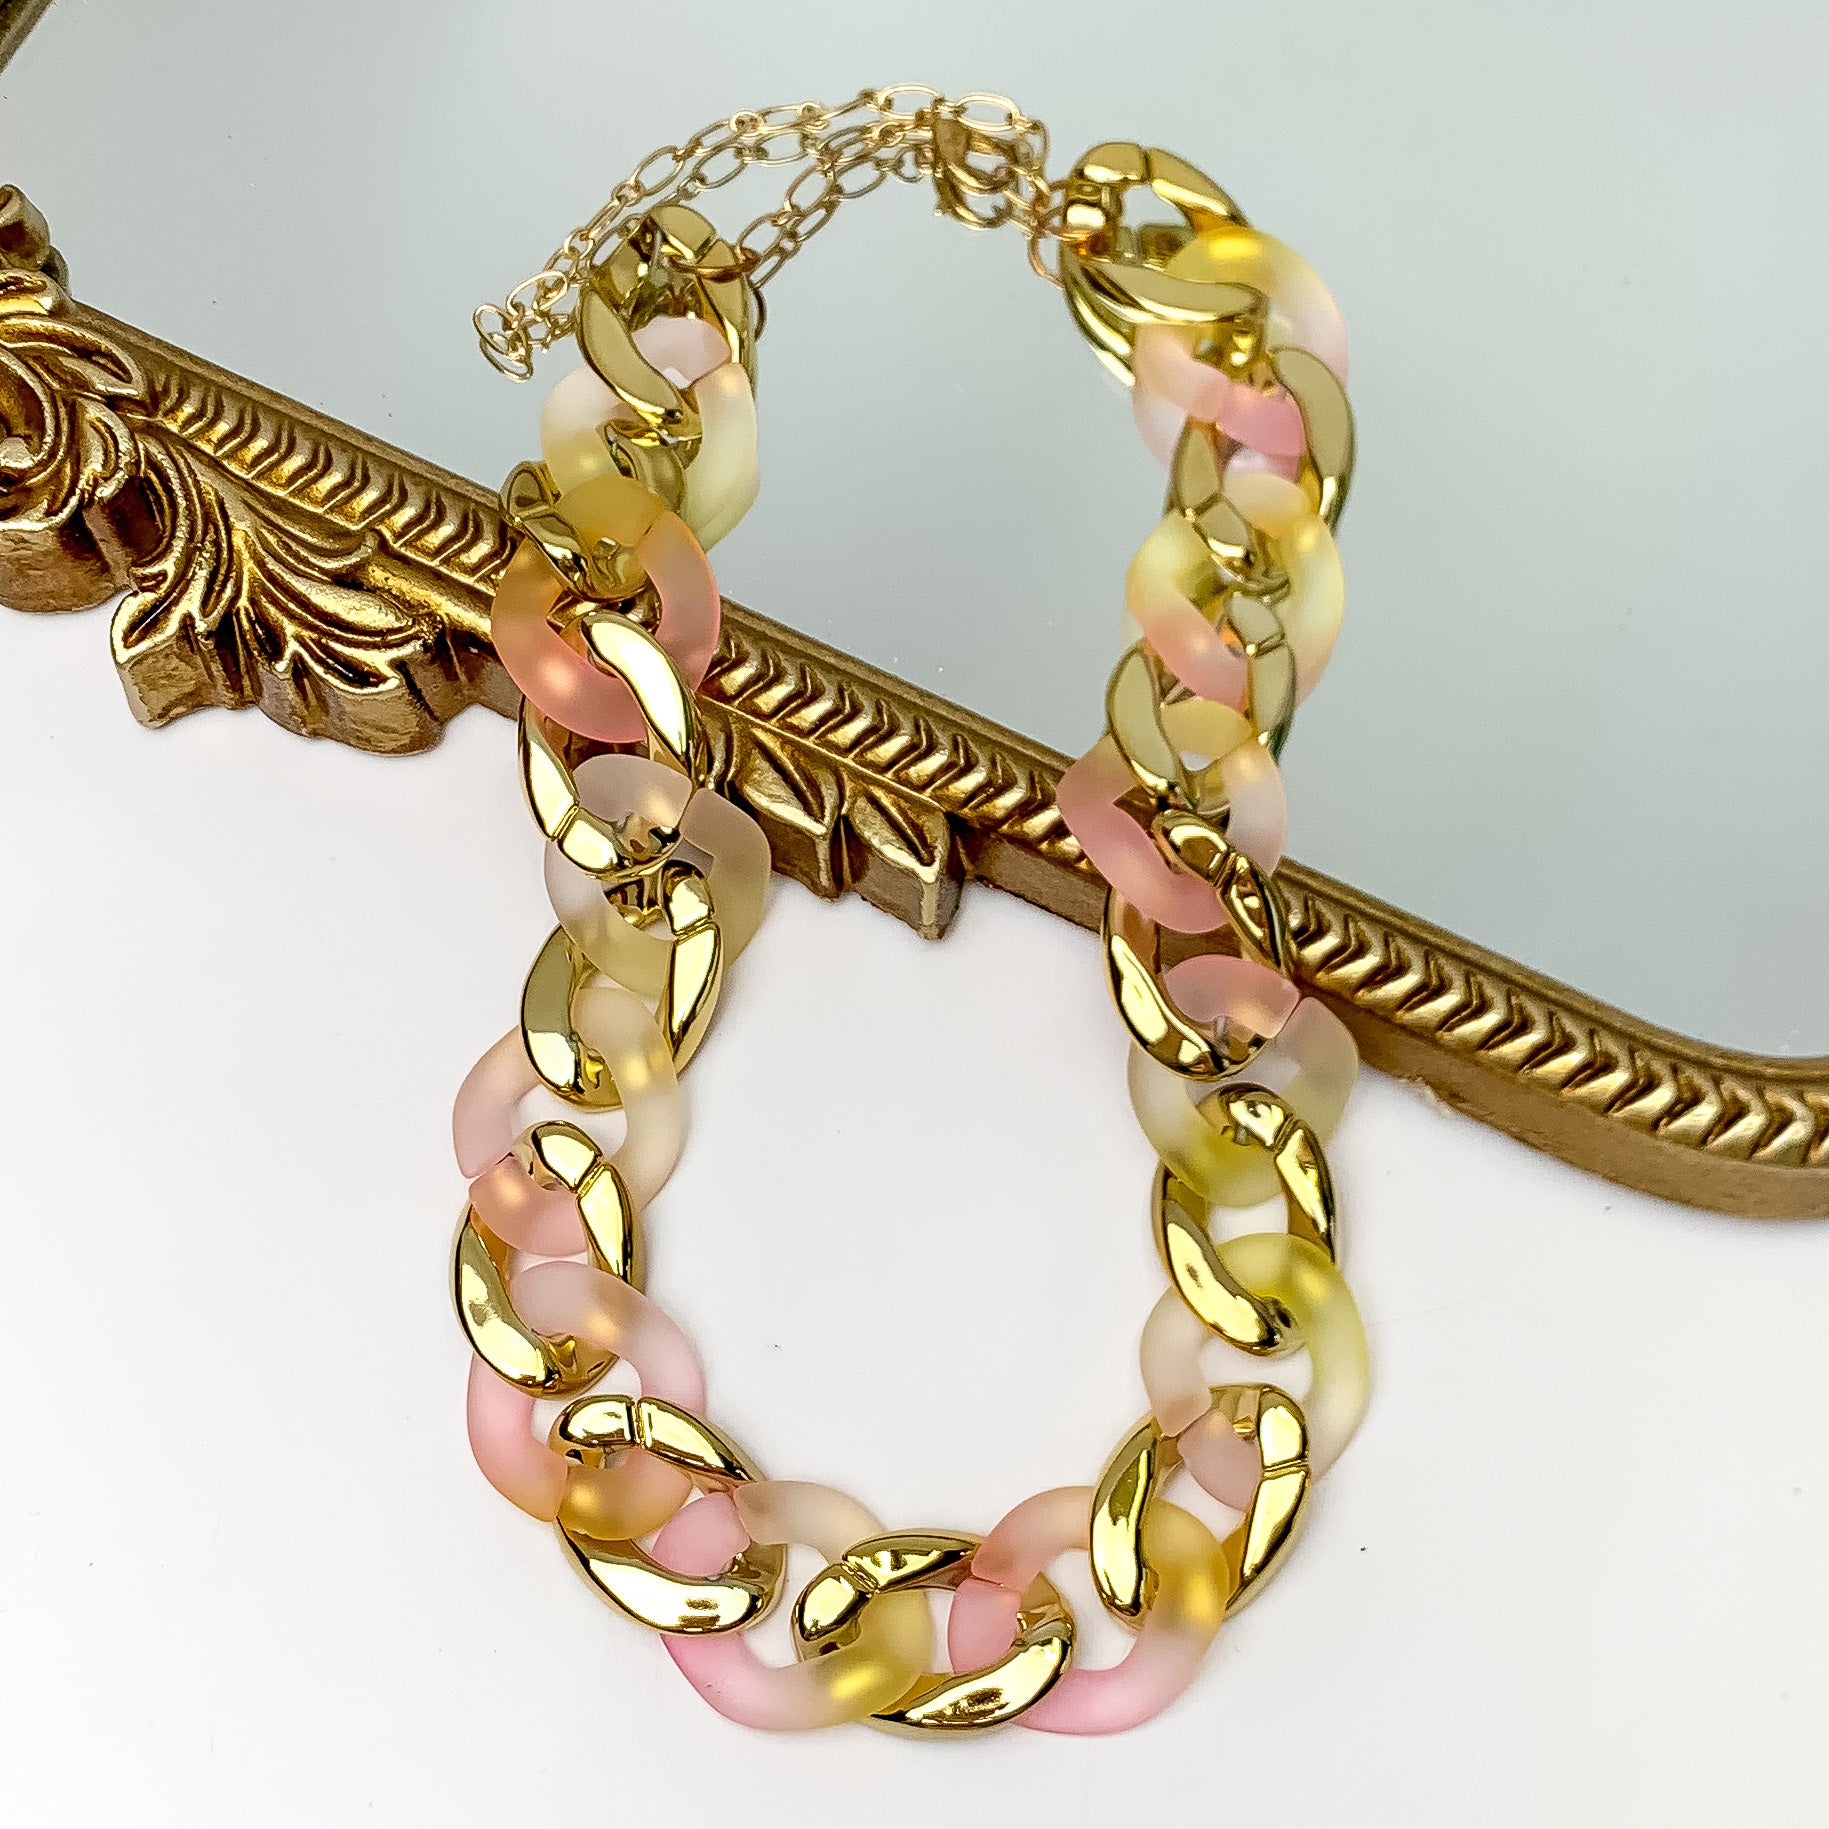 Pictured partially on a gold mirror on a white background is a chain link necklace in gold and pink. 